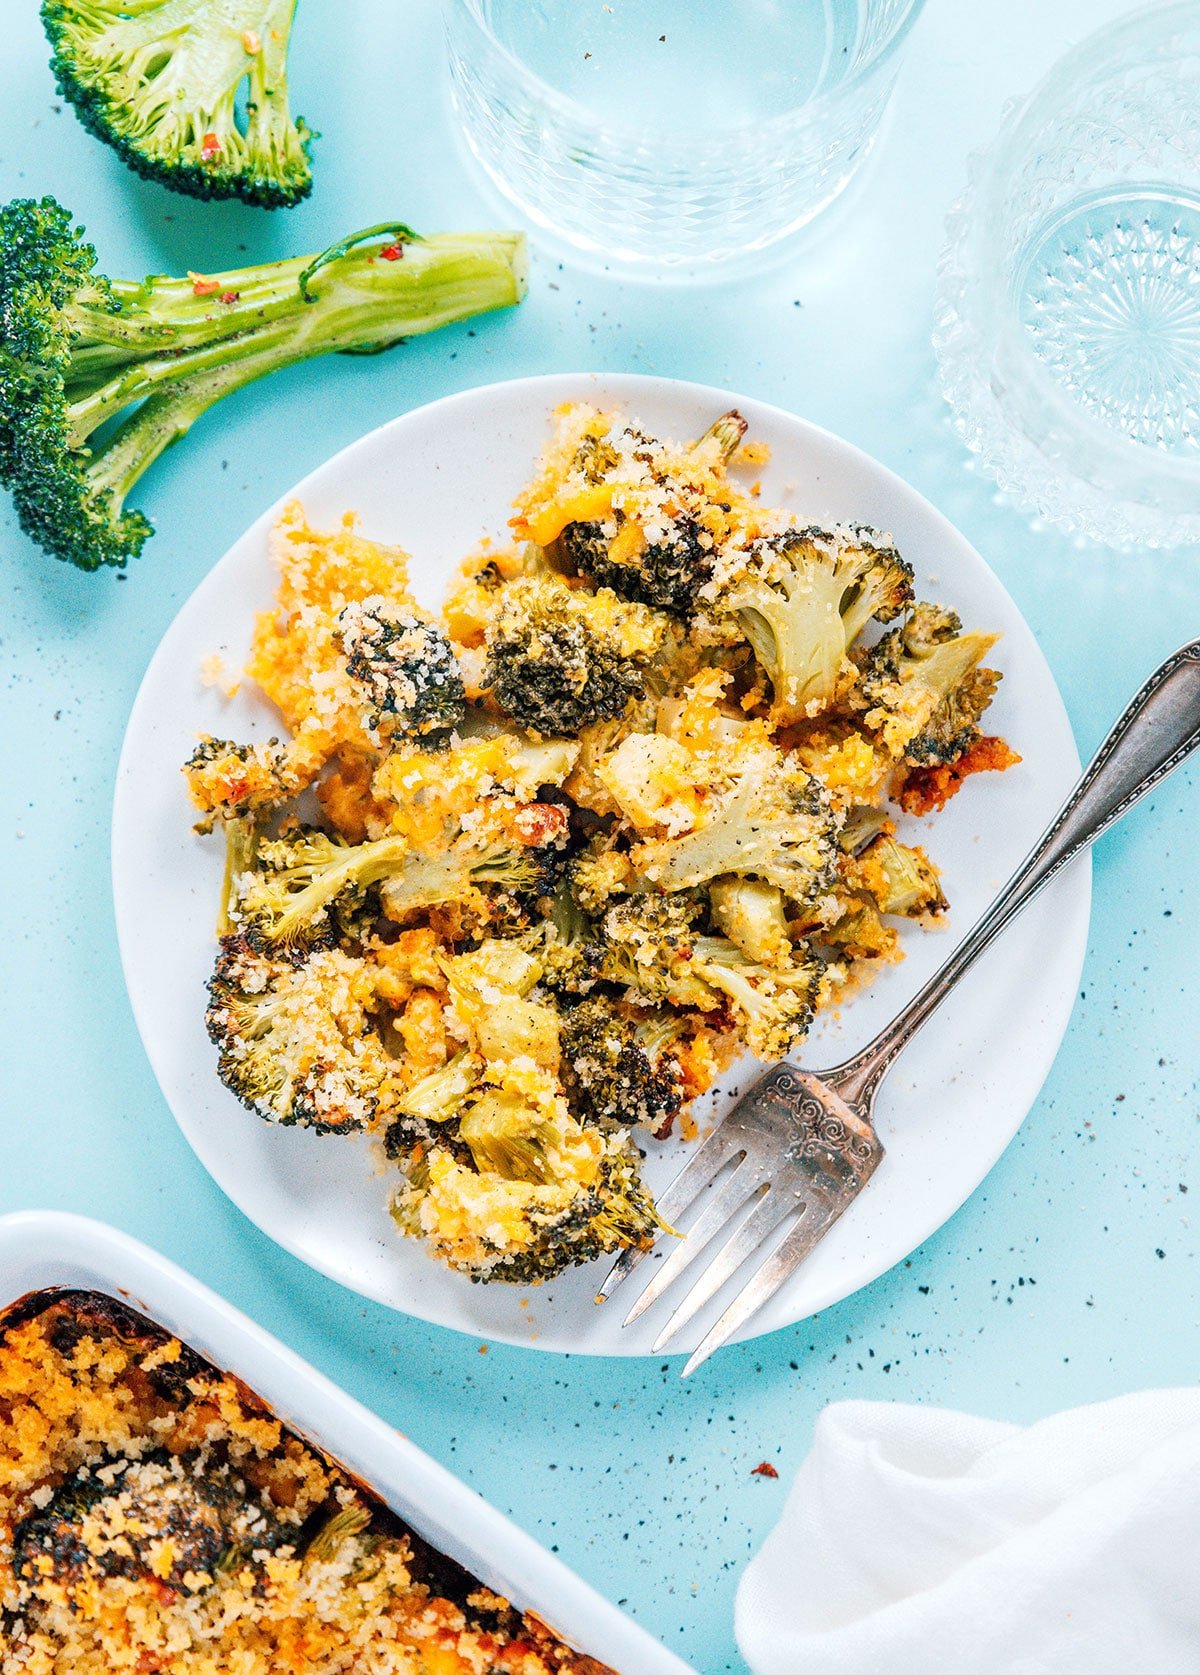 A serving of cheesy broccoli casserole on a small white plate with a fork.